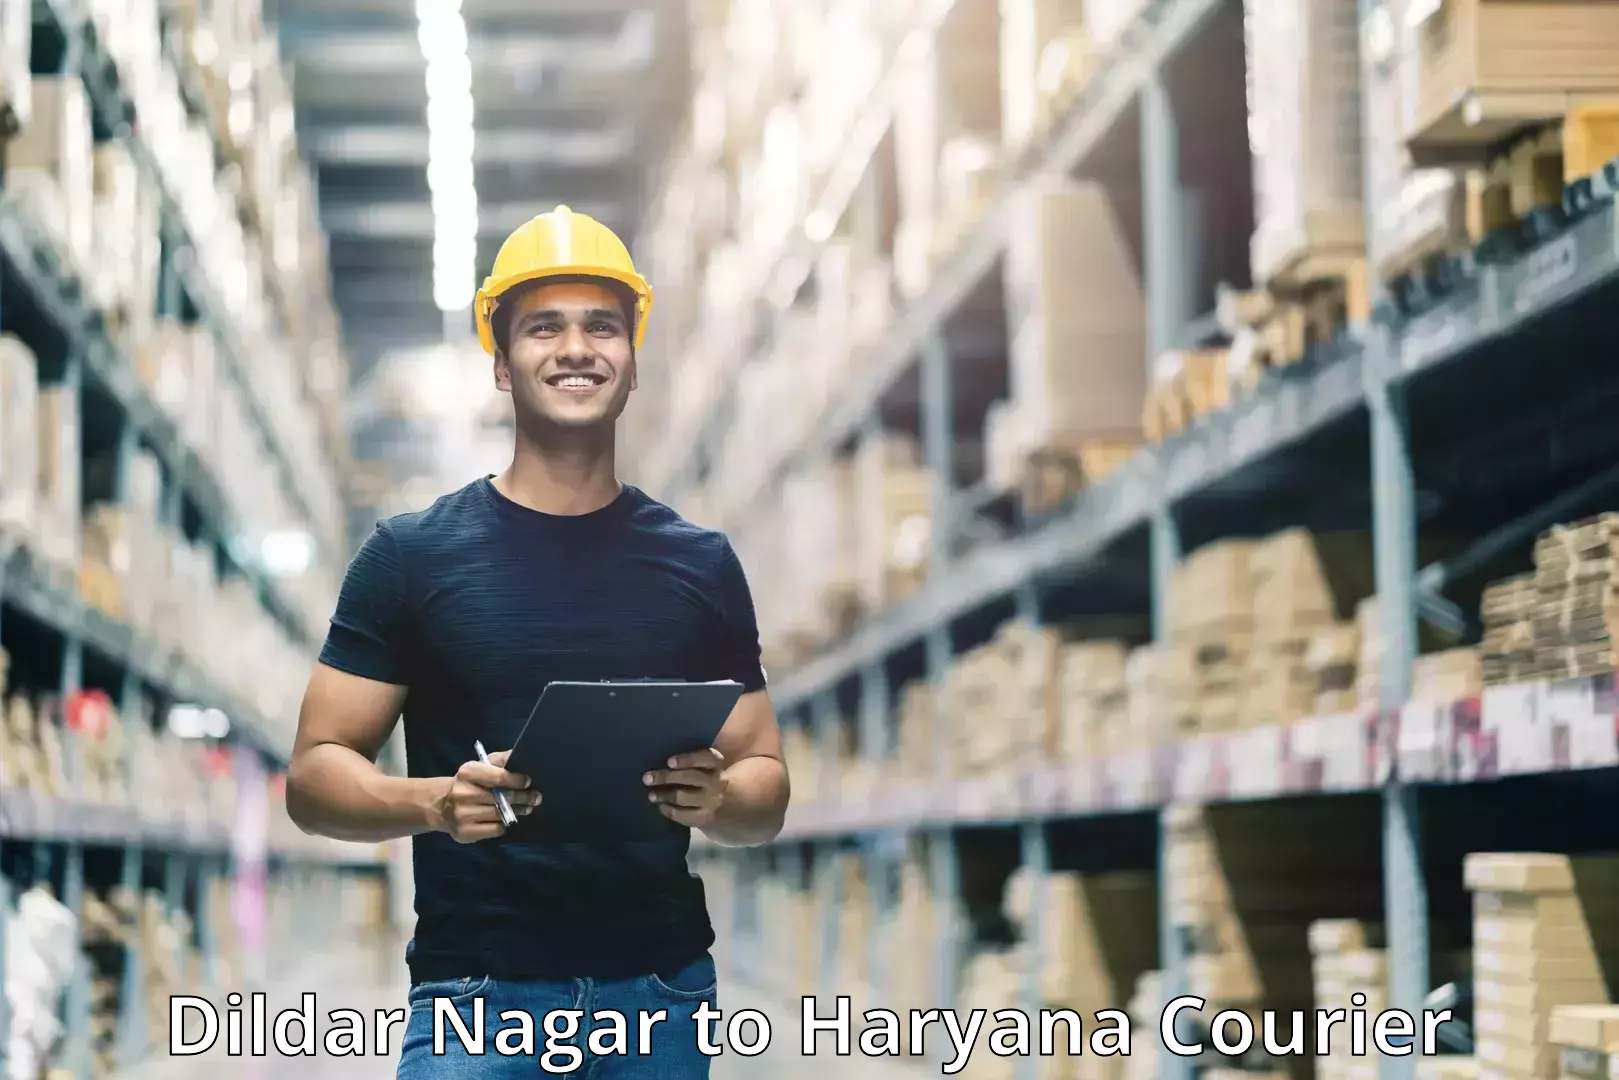 Cash on delivery service Dildar Nagar to Haryana